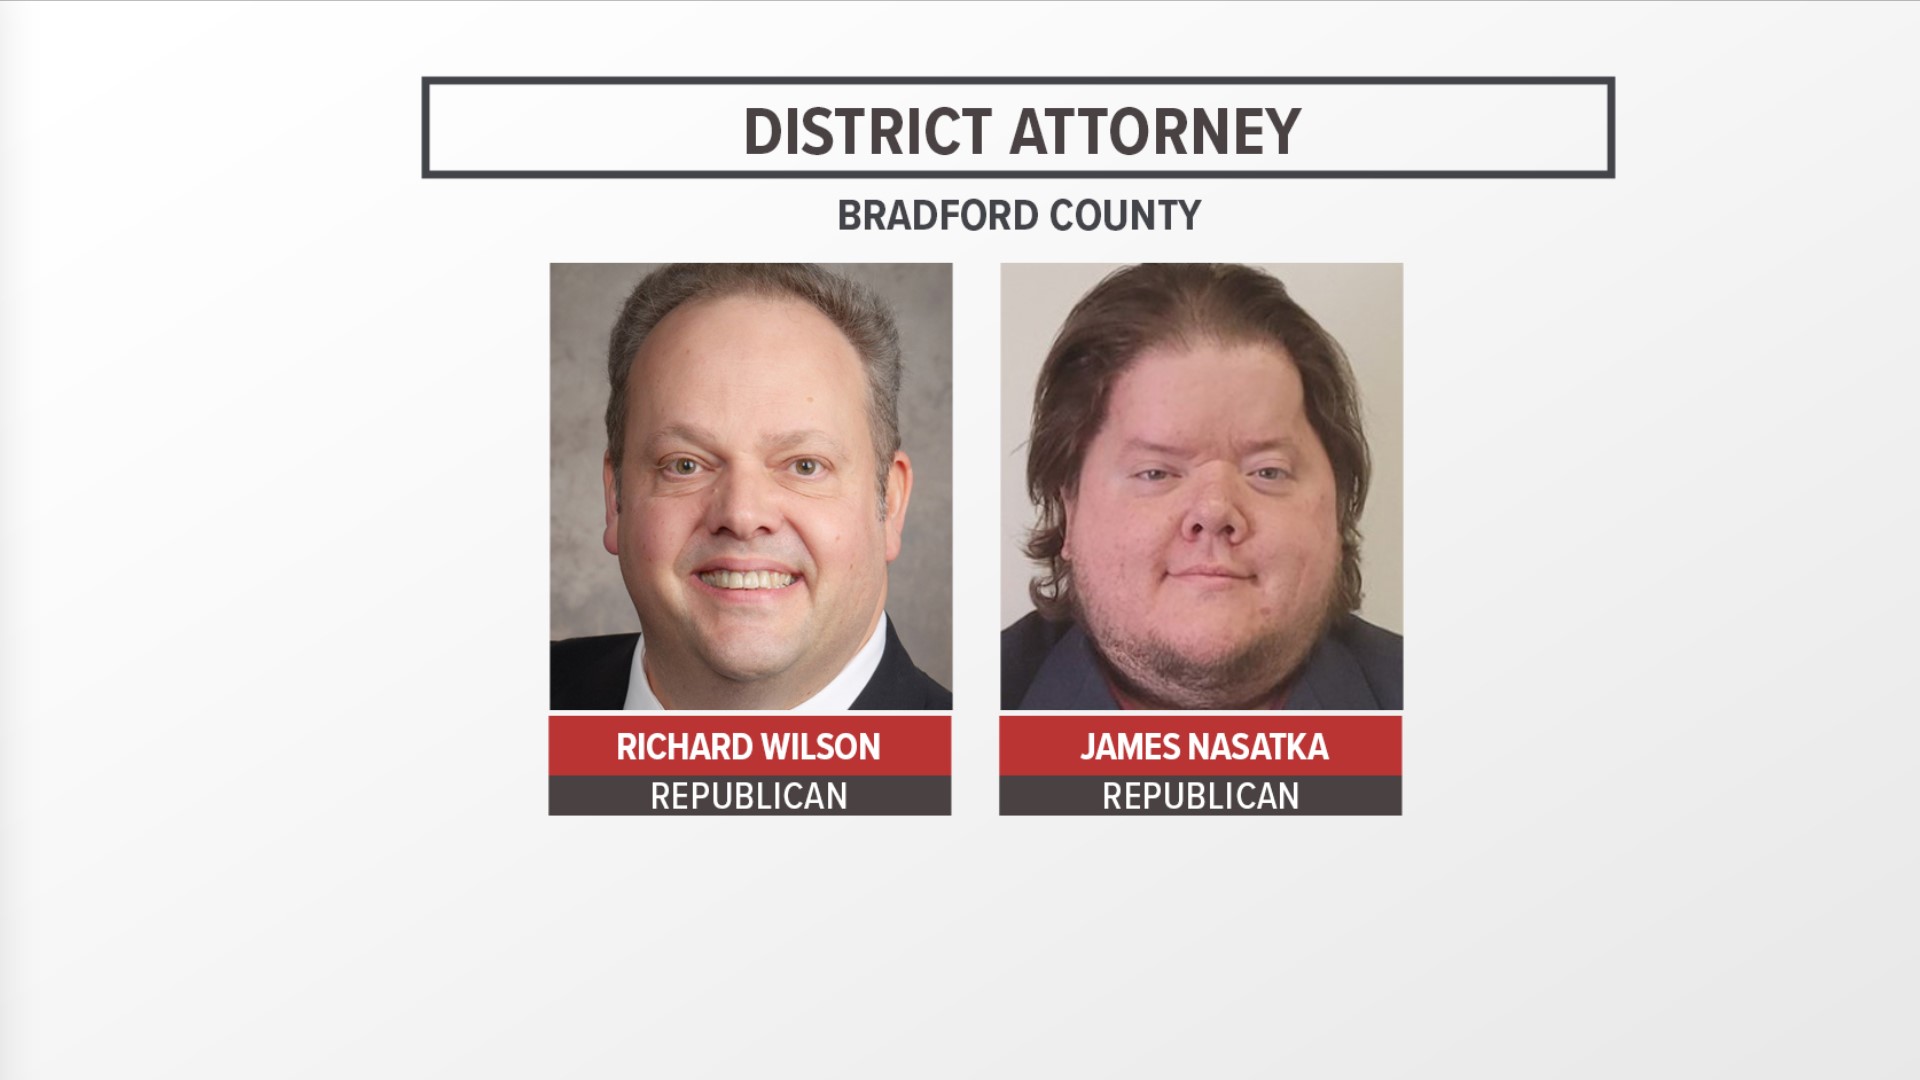 The primary election is less than a week away, and the race for a new district attorney is on in Bradford County.